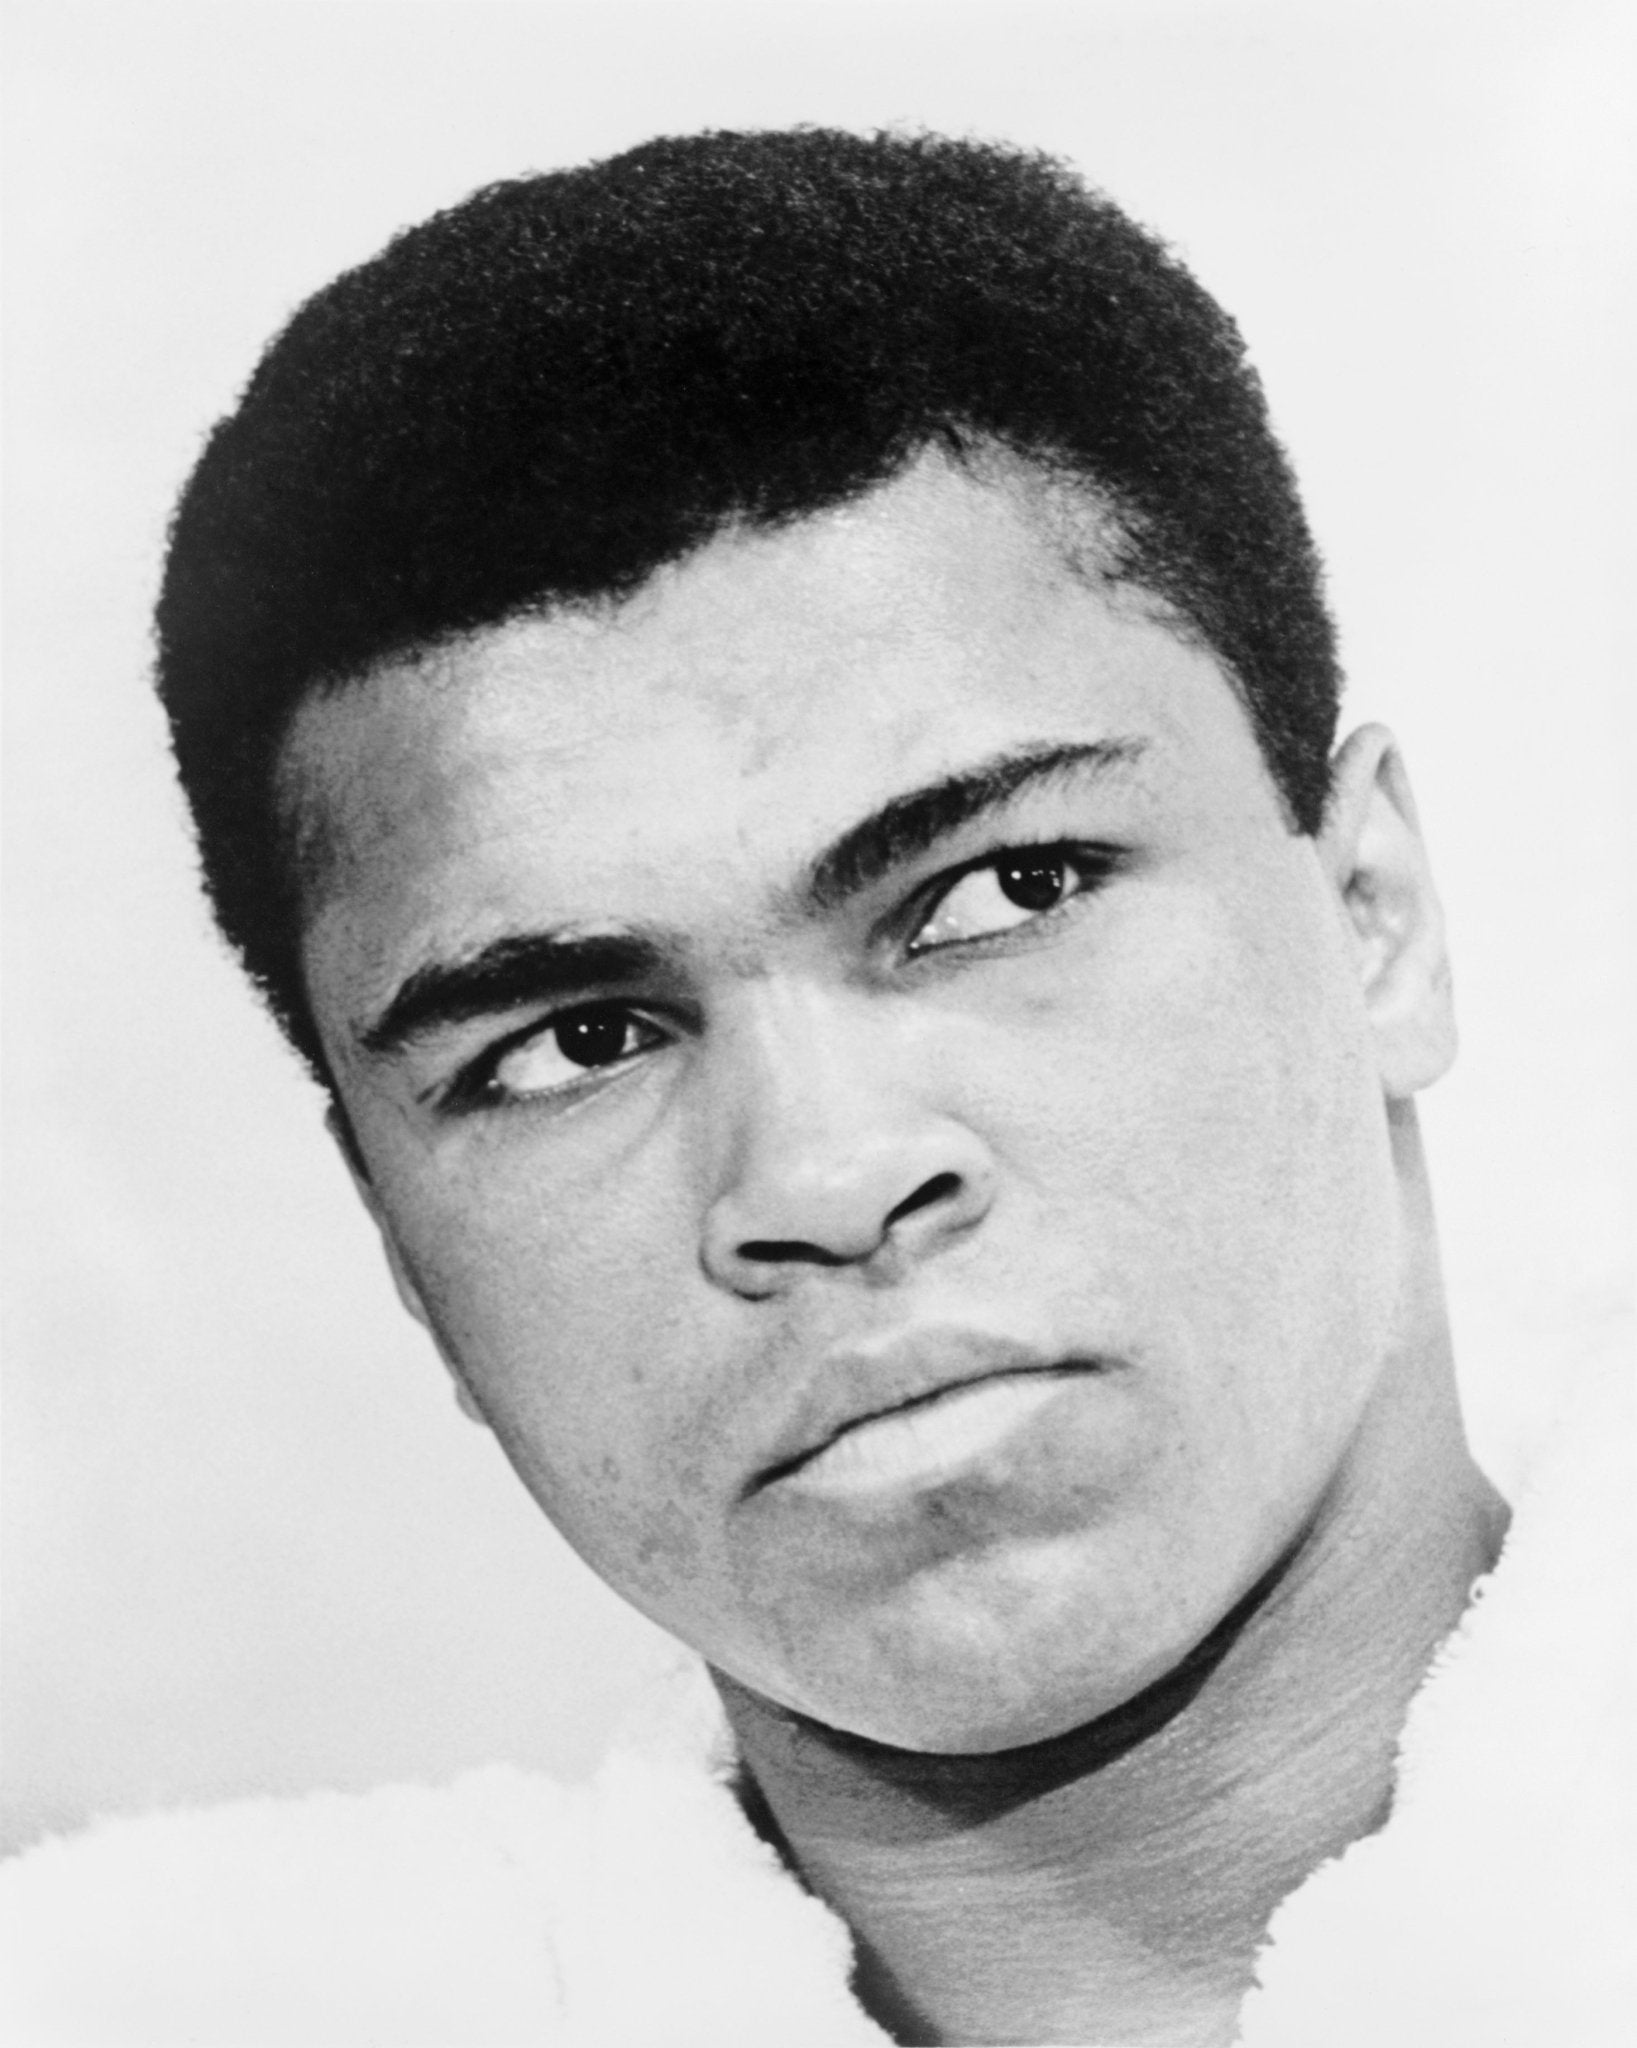 Muhammad Ali: From Beginner To Gold Medalist In 6 Years (And Beyond)